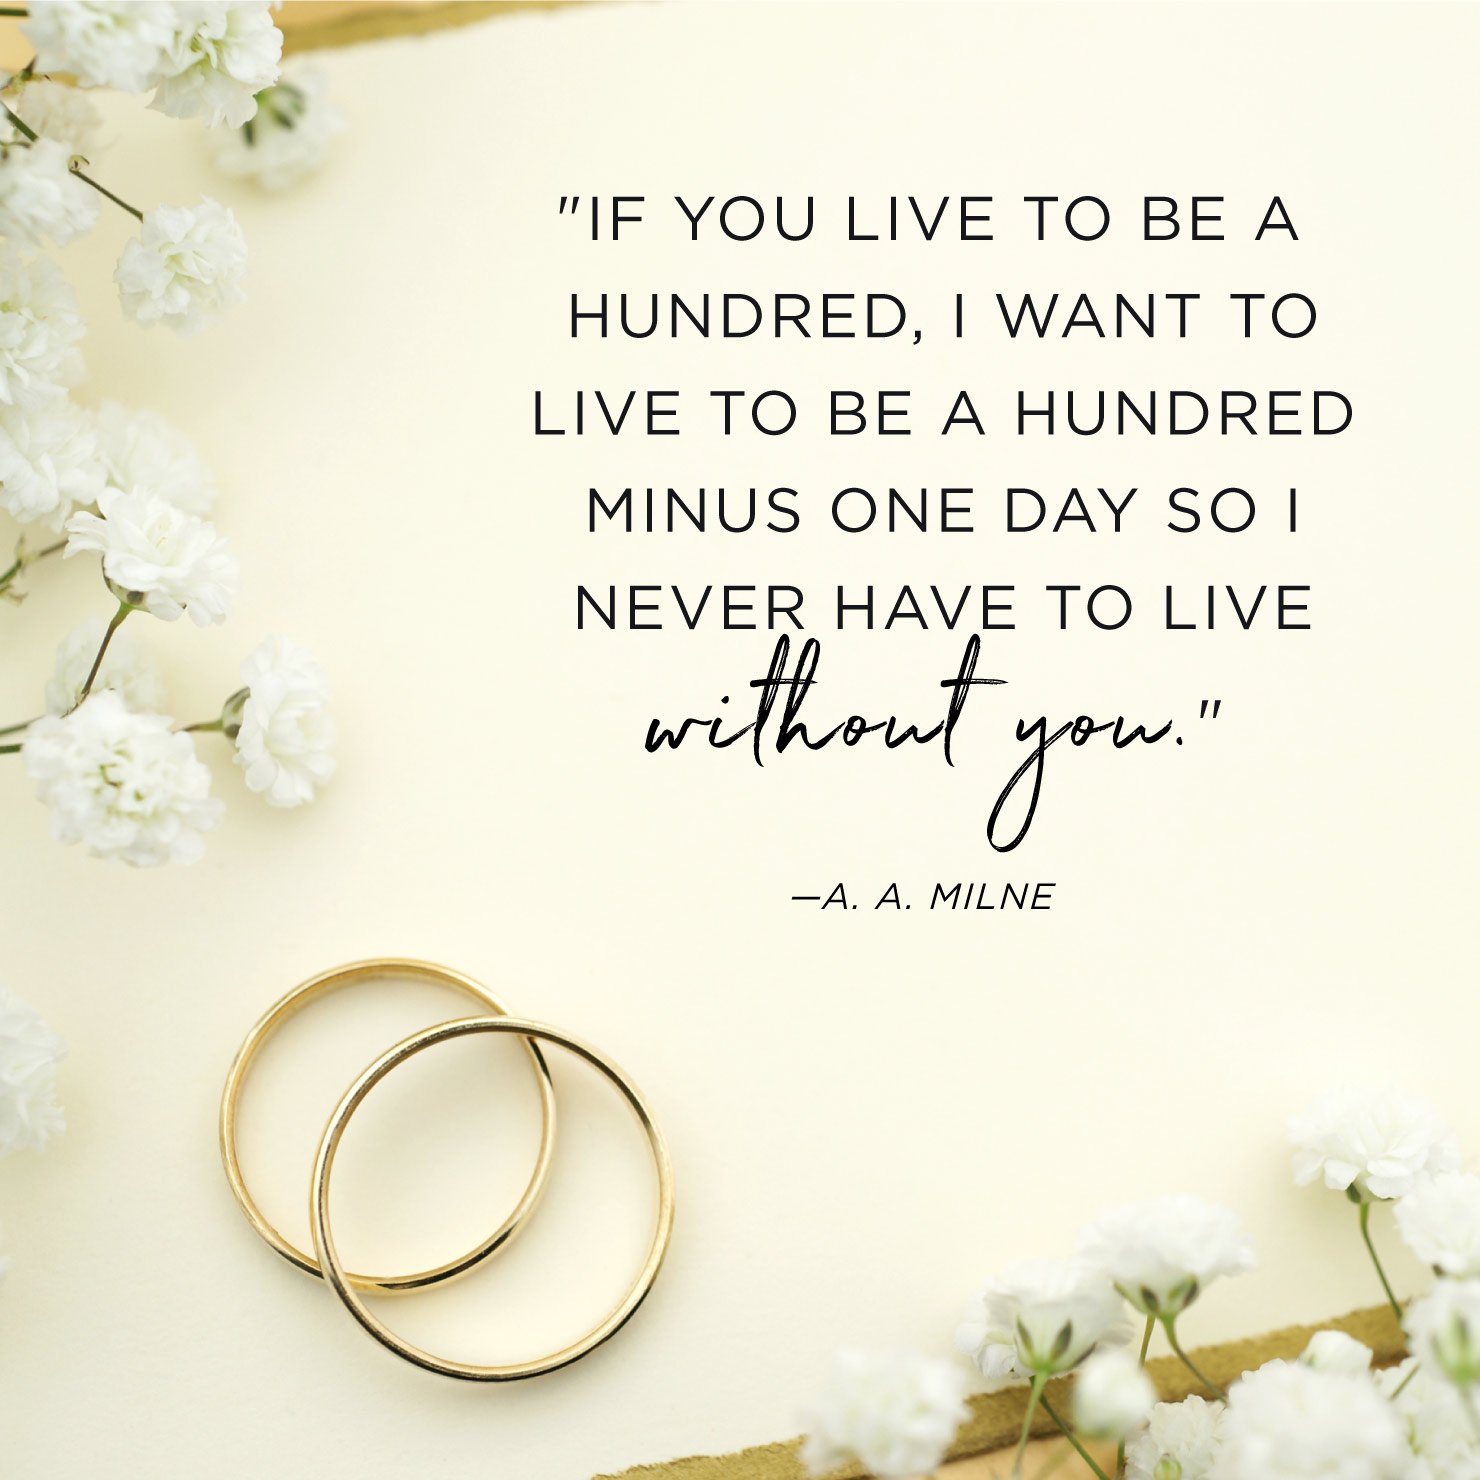 Quote above background image: If you live to be a hundred, I want to live to be a hundred minus one day so I never have to live without you. - A. A. Milne